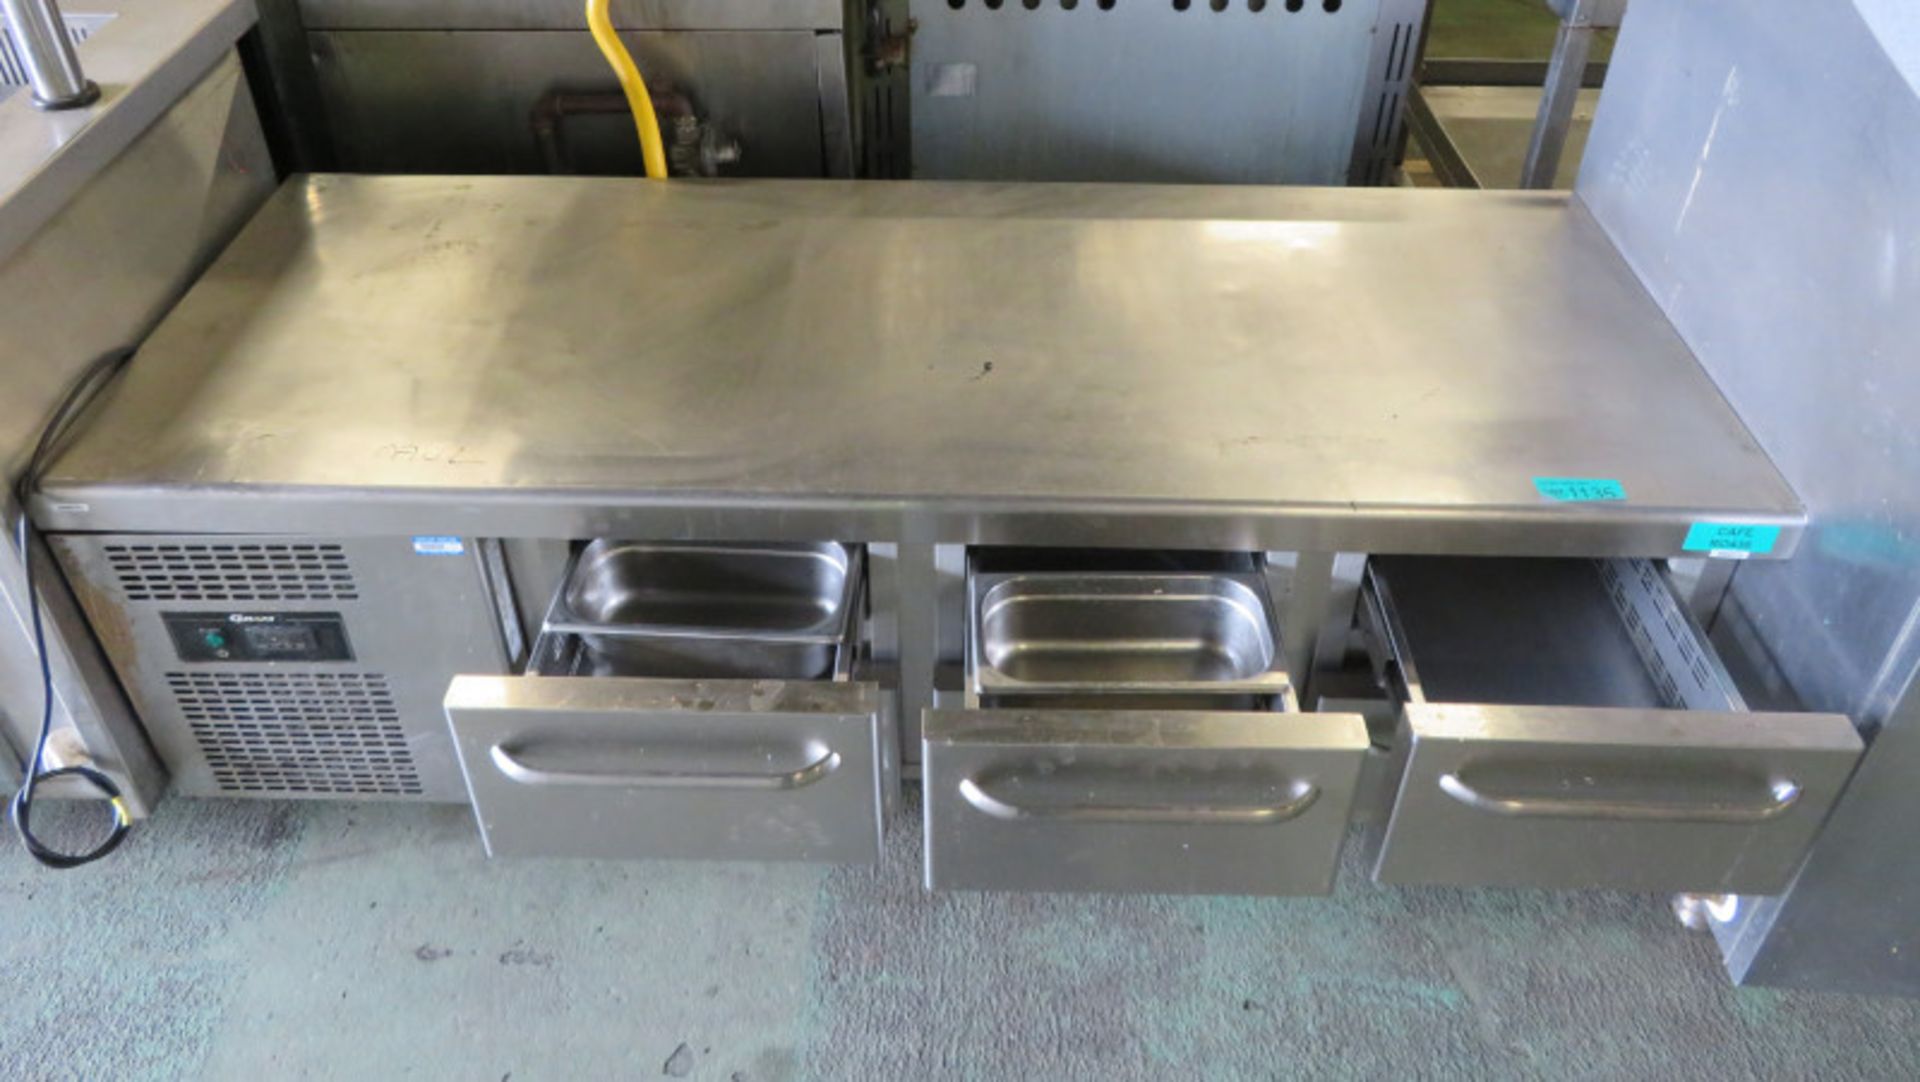 GRAM KSO-6H-OPE5 Stainless Steel 6-Draw Chiller - L1850 x W720 x H630mm - Image 3 of 3